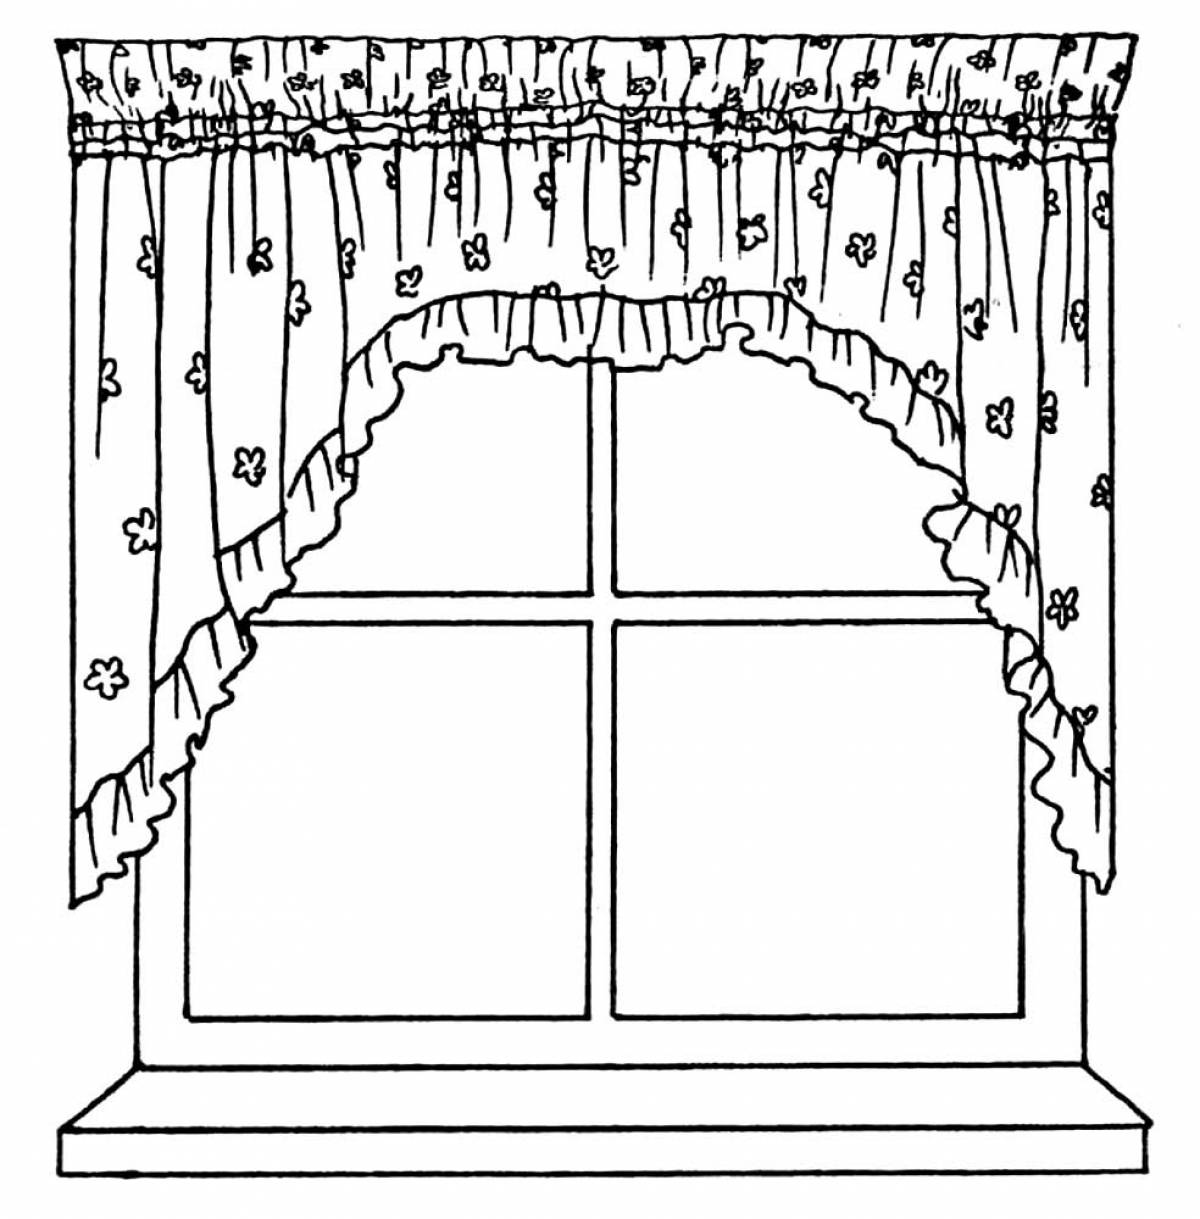 Window with curtains